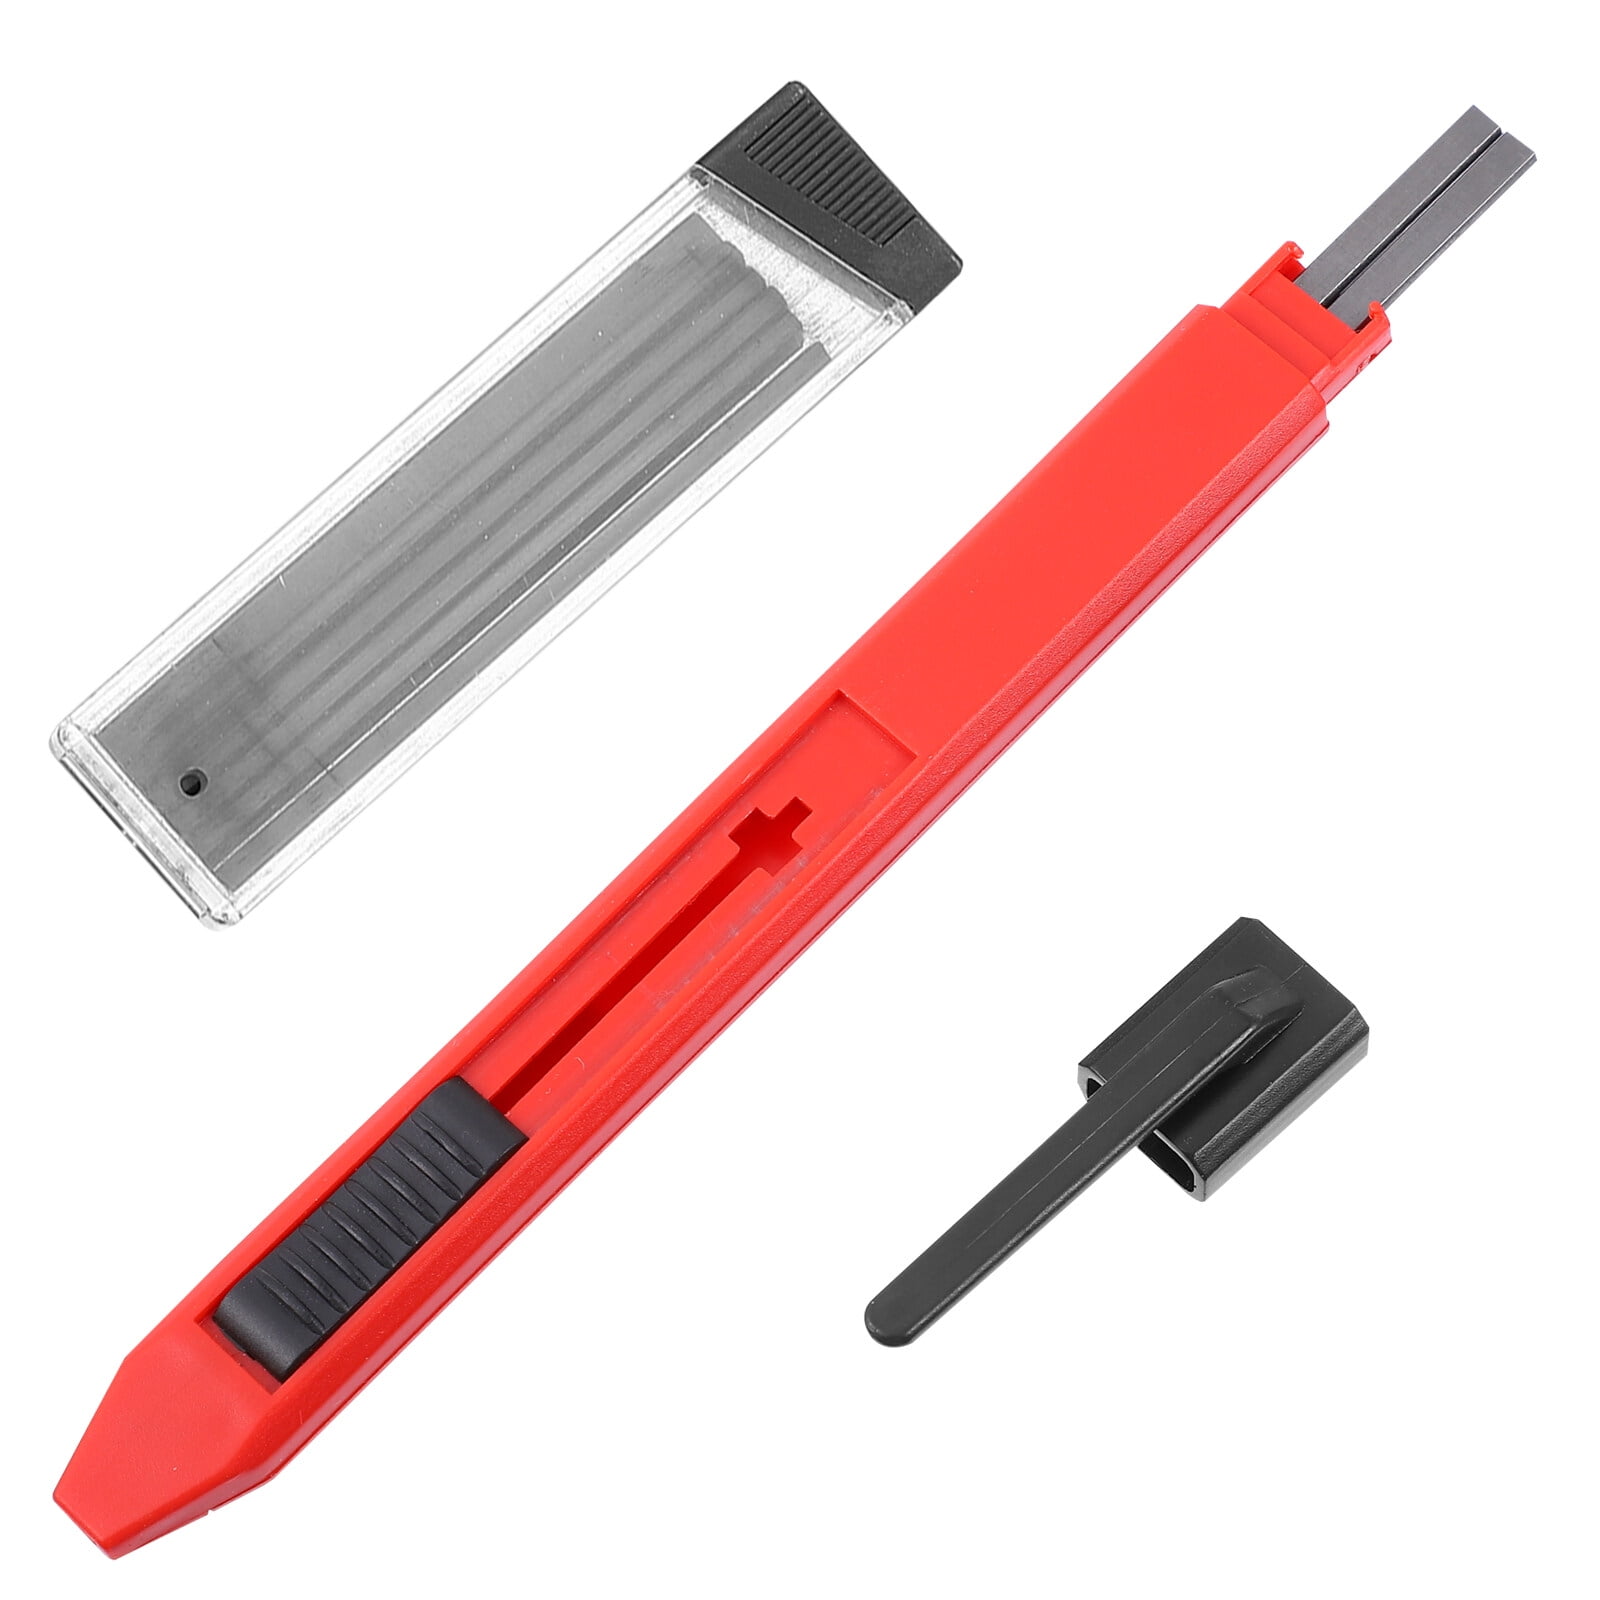 TanHades Mechanical Pencil Marker Marking Tool with Built-in Sharpener  Carpenter Scriber Marking Kit for Woodworking Architect mechanical pencil  set for sketching and drawing : : DIY & Tools